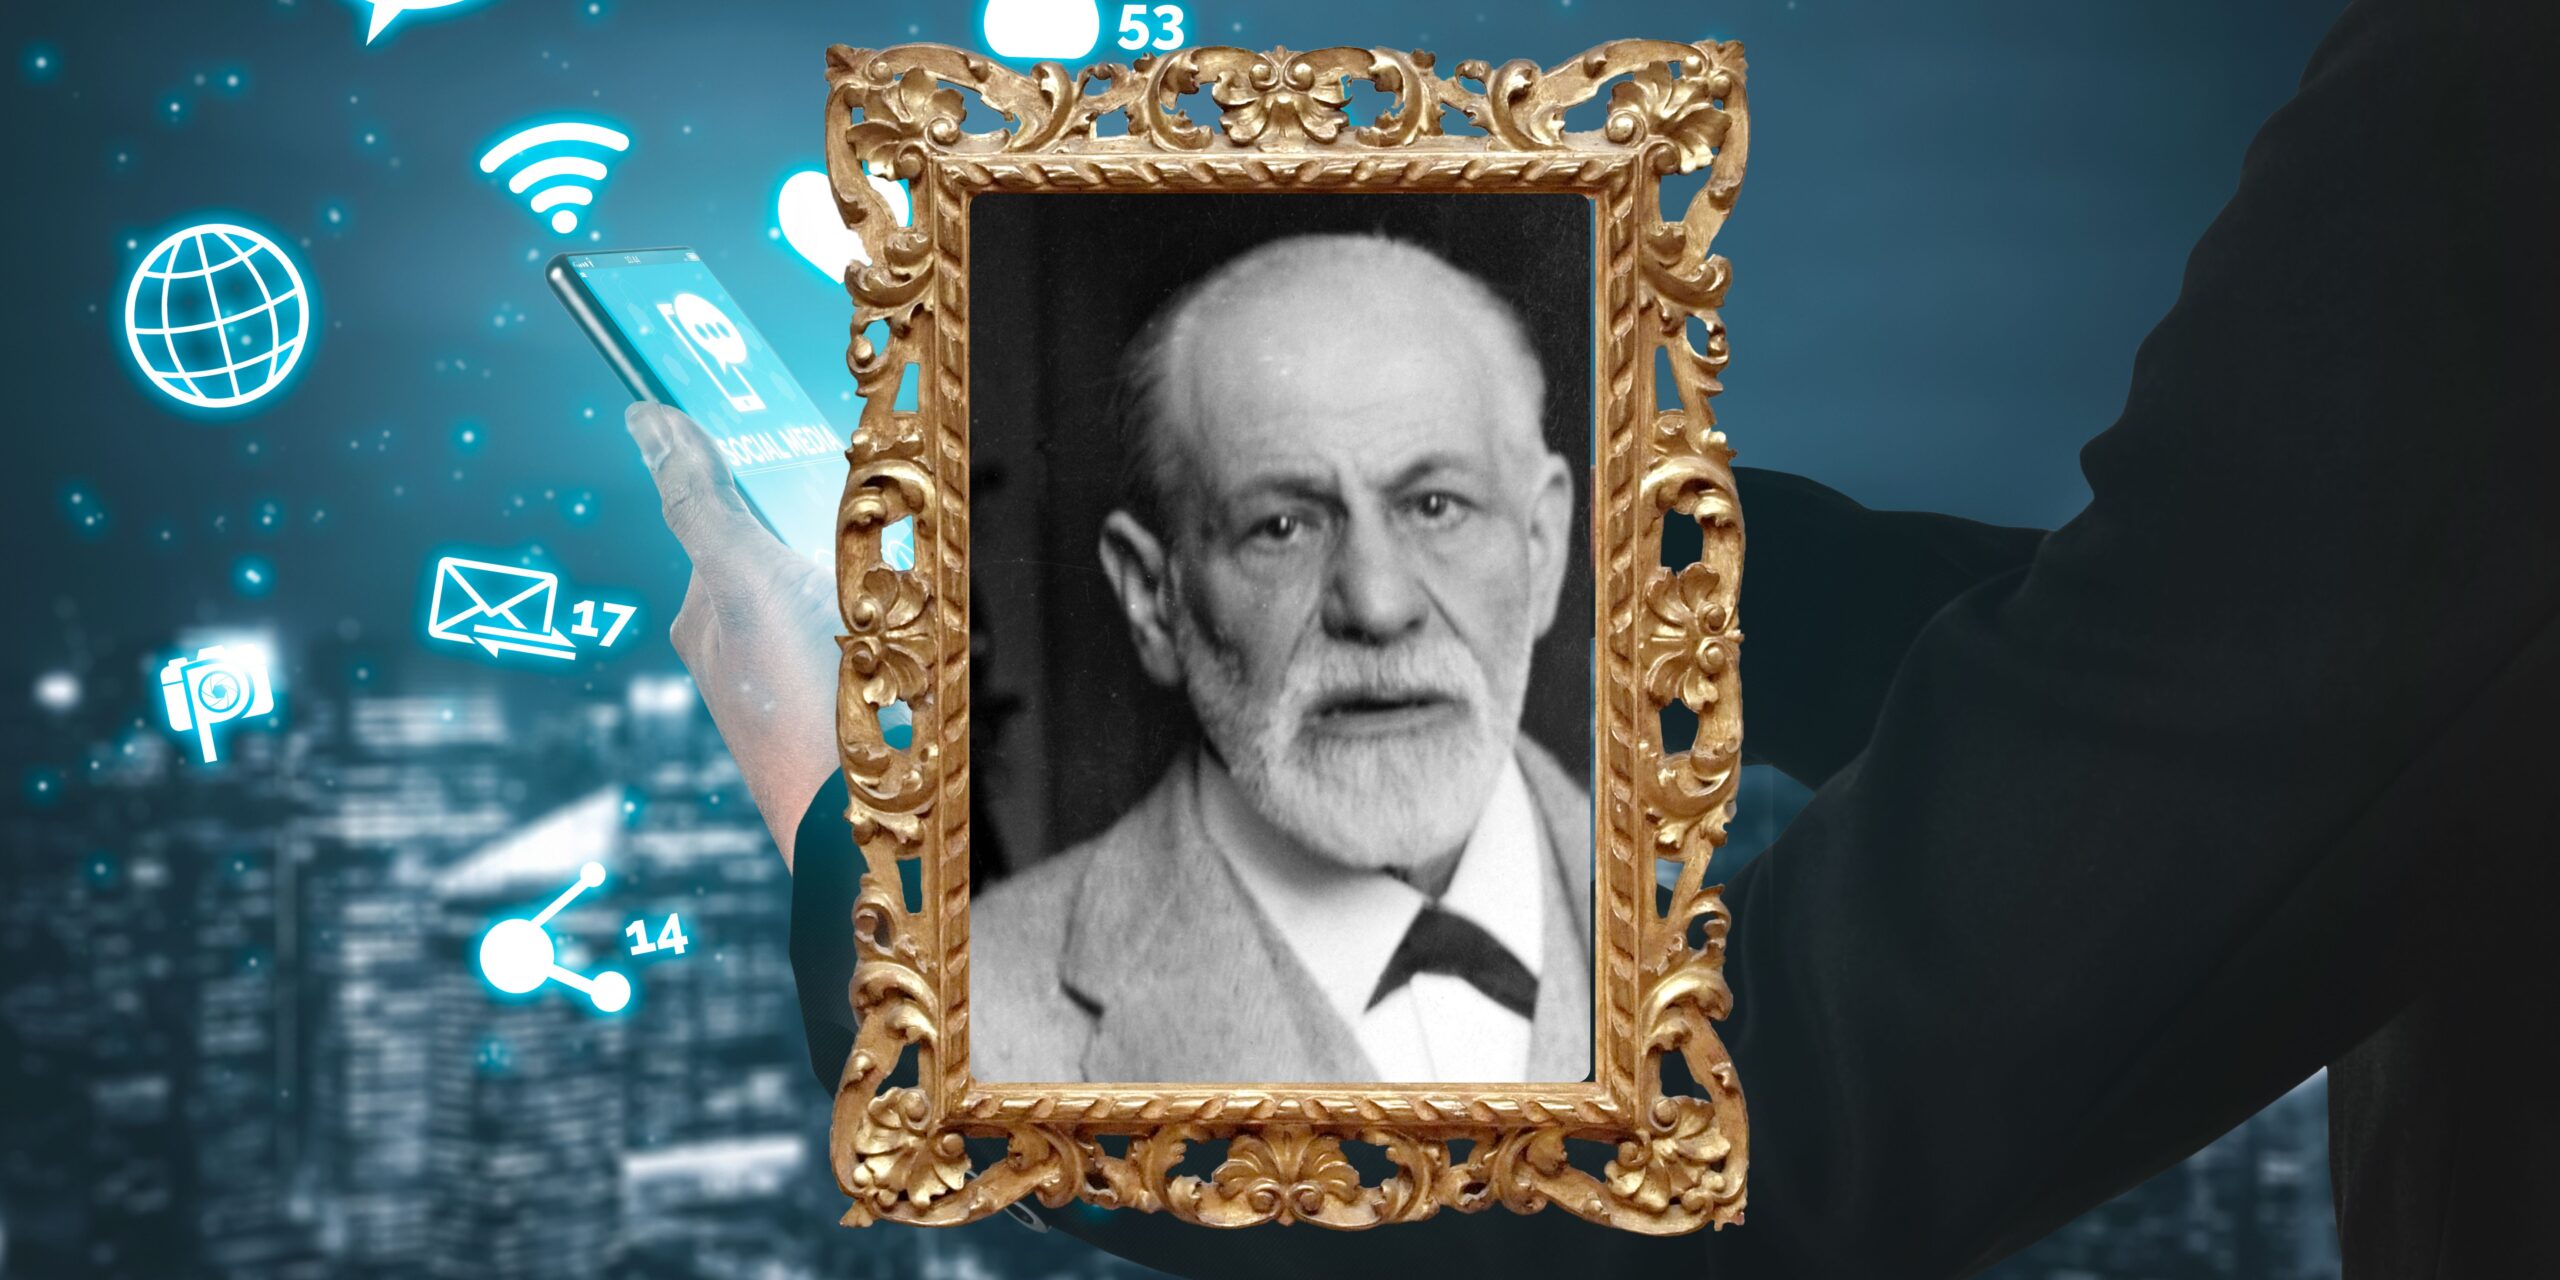 A picture of Sigmund Freud set within a gold plated frame with a background of digital media